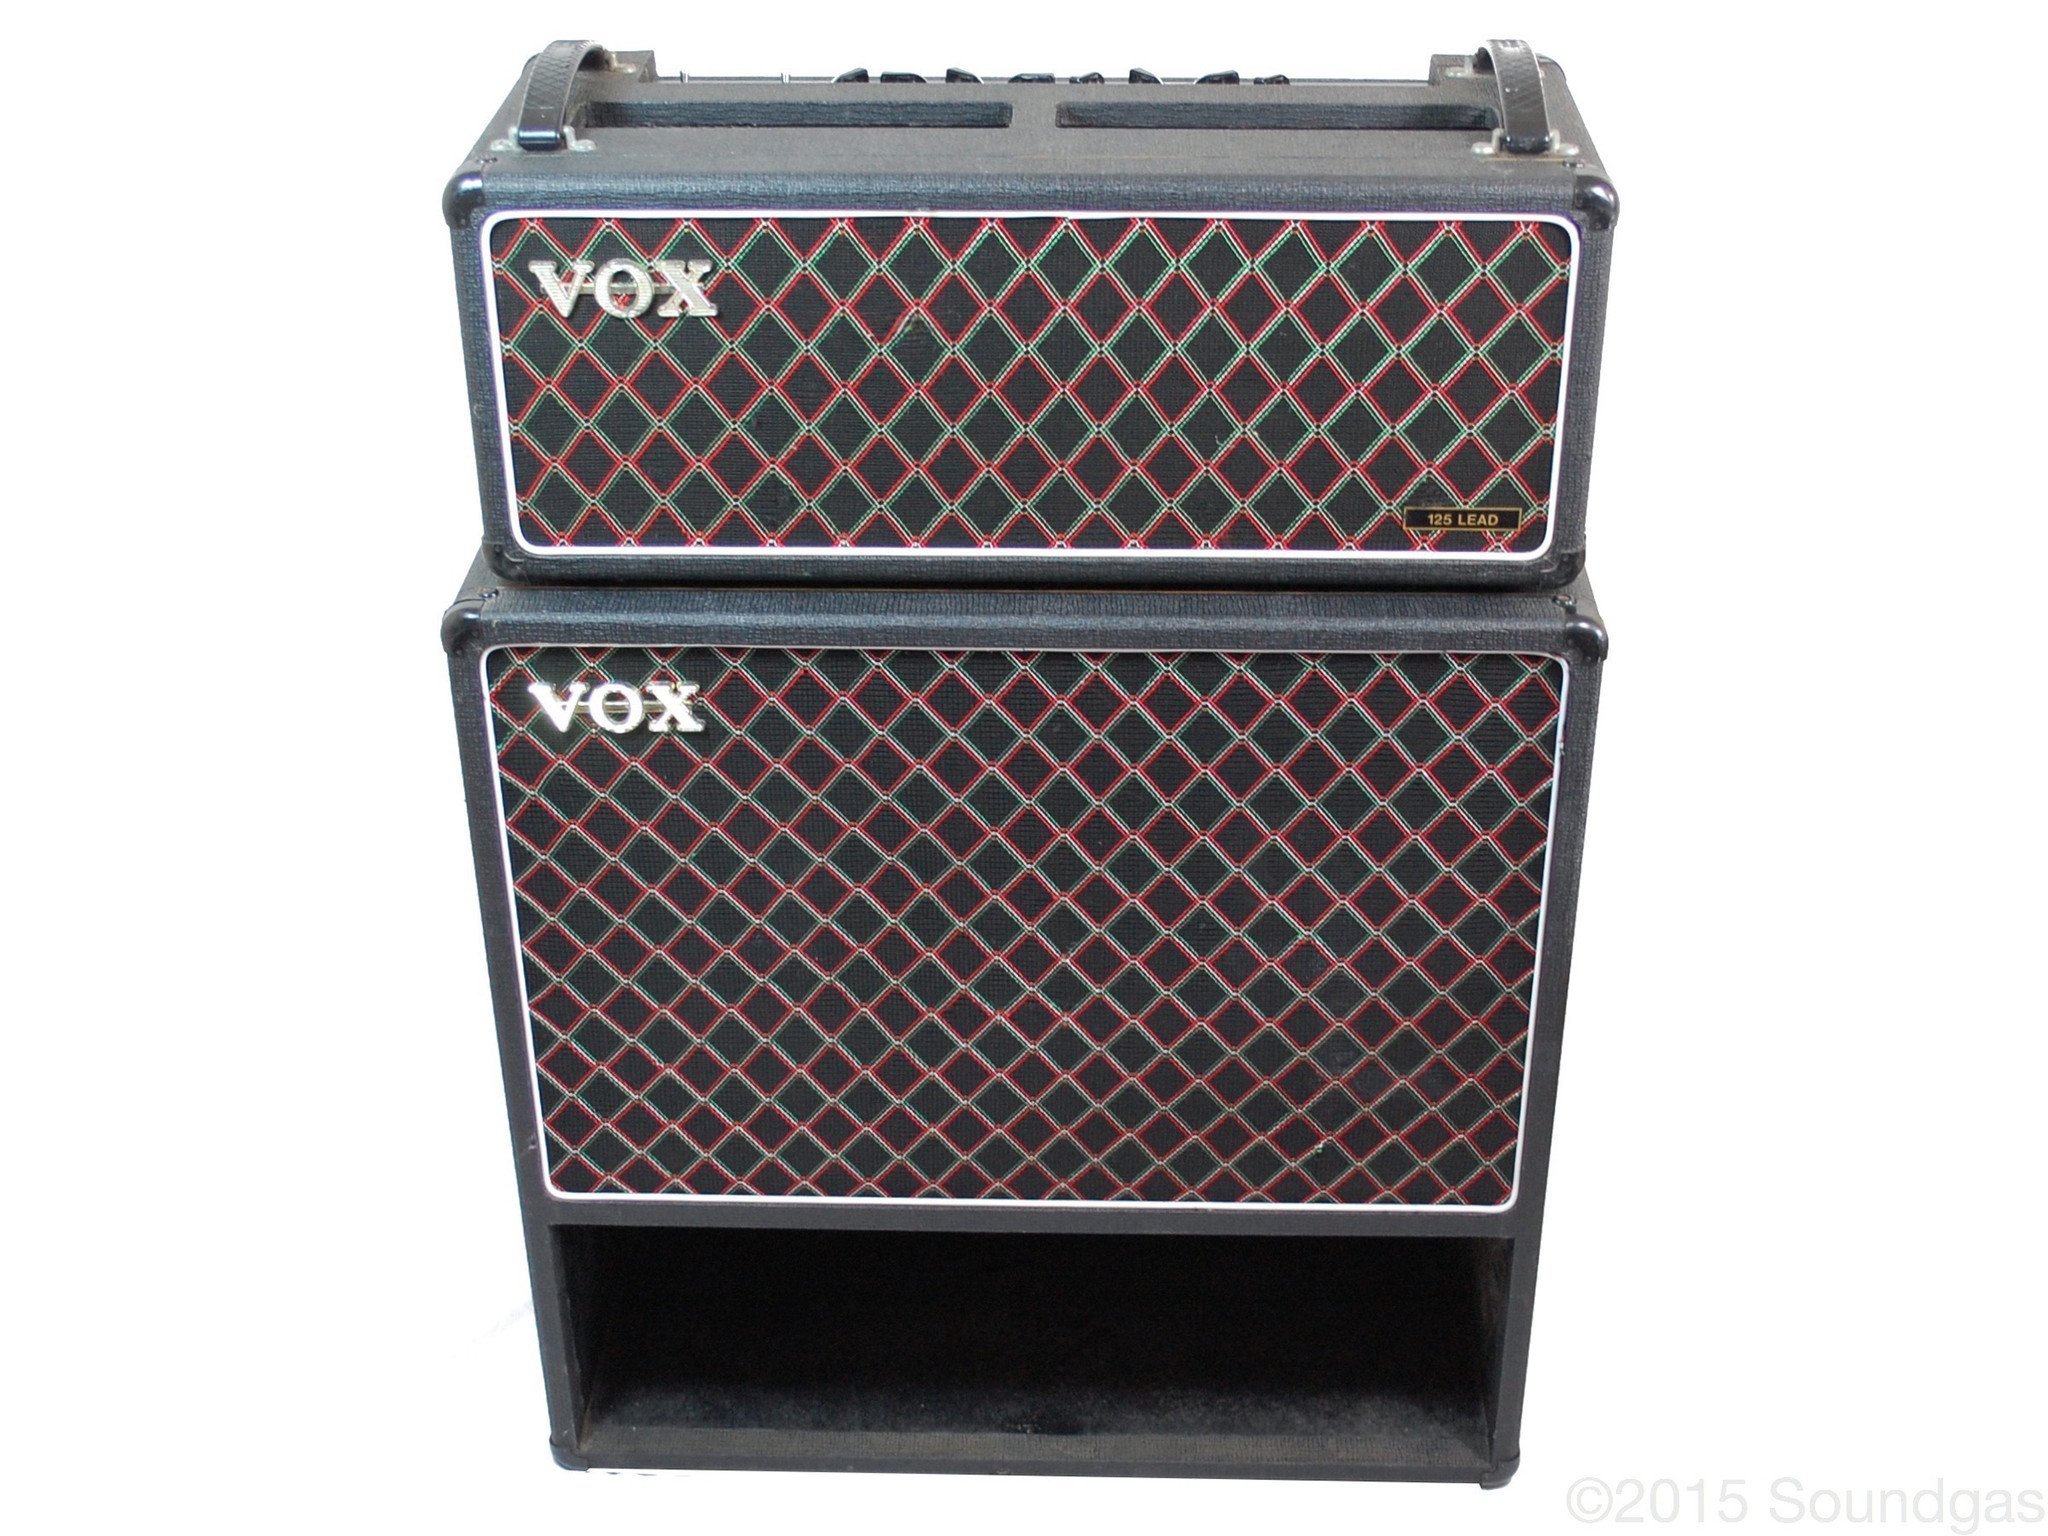 Vox 125 Head and Cab (Cover)